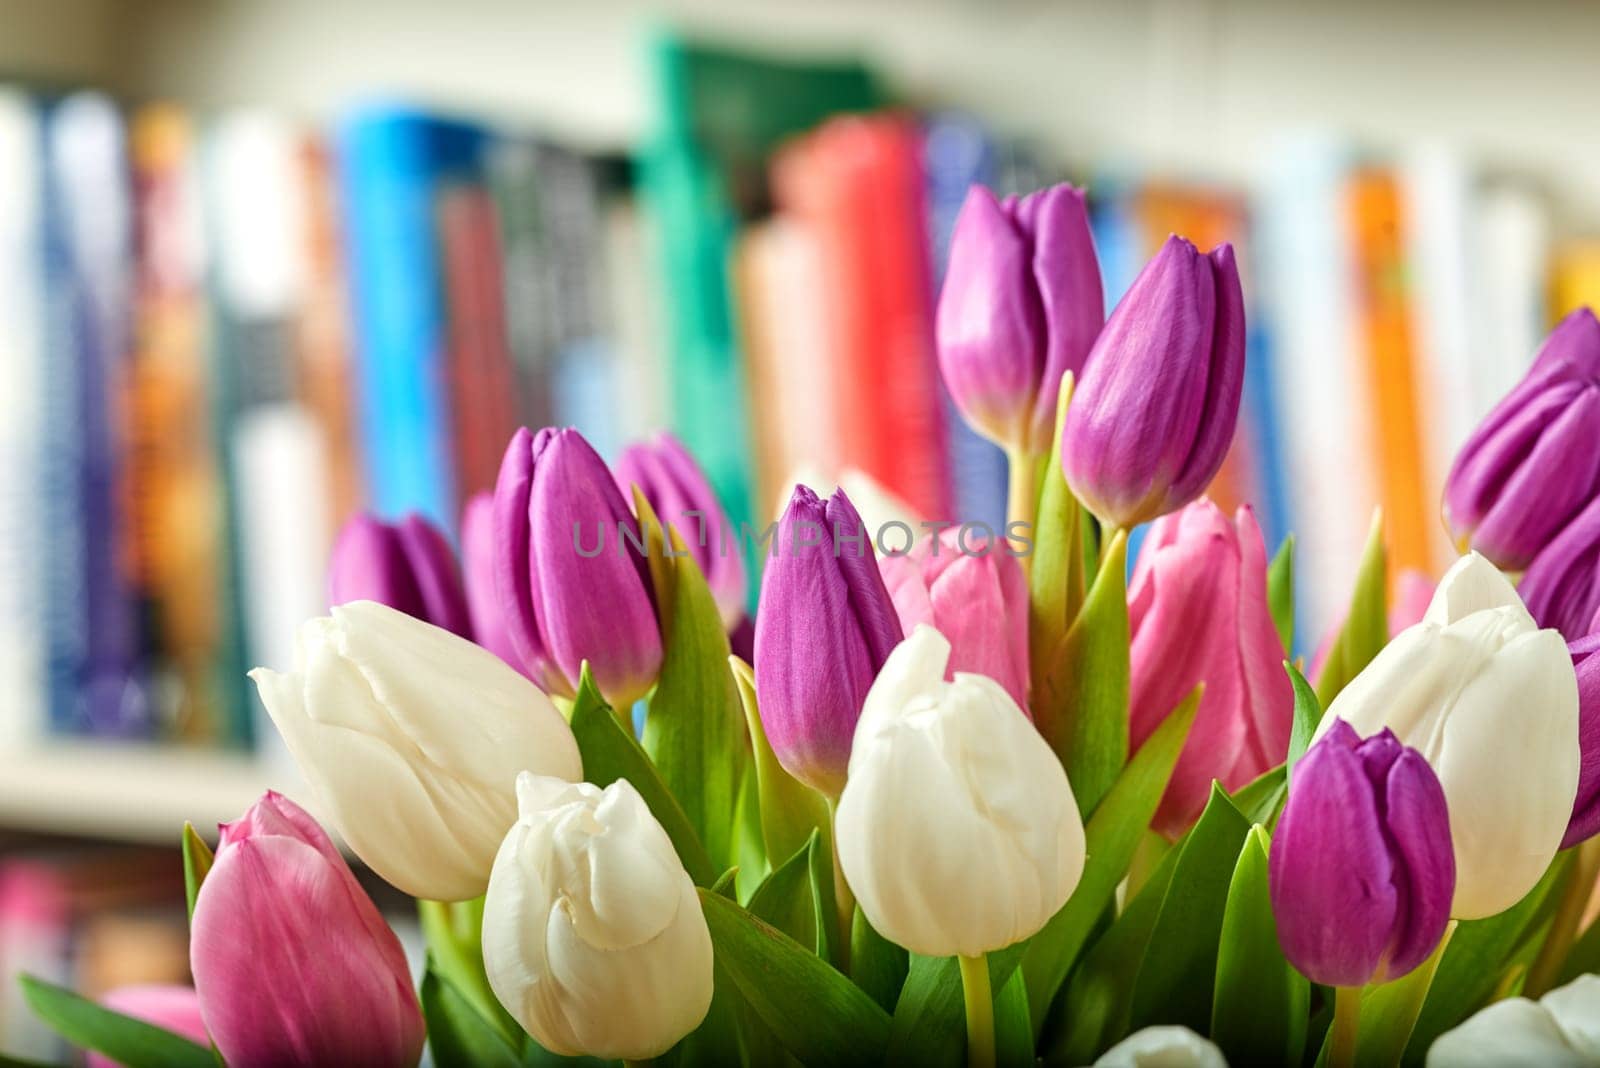 Fresh, flowers and tulips in home for decor, present or surprise by book shelf in house. Plants, petal and color floral for creativity as collection for wallpaper, screensaver and natural indoor by YuriArcurs